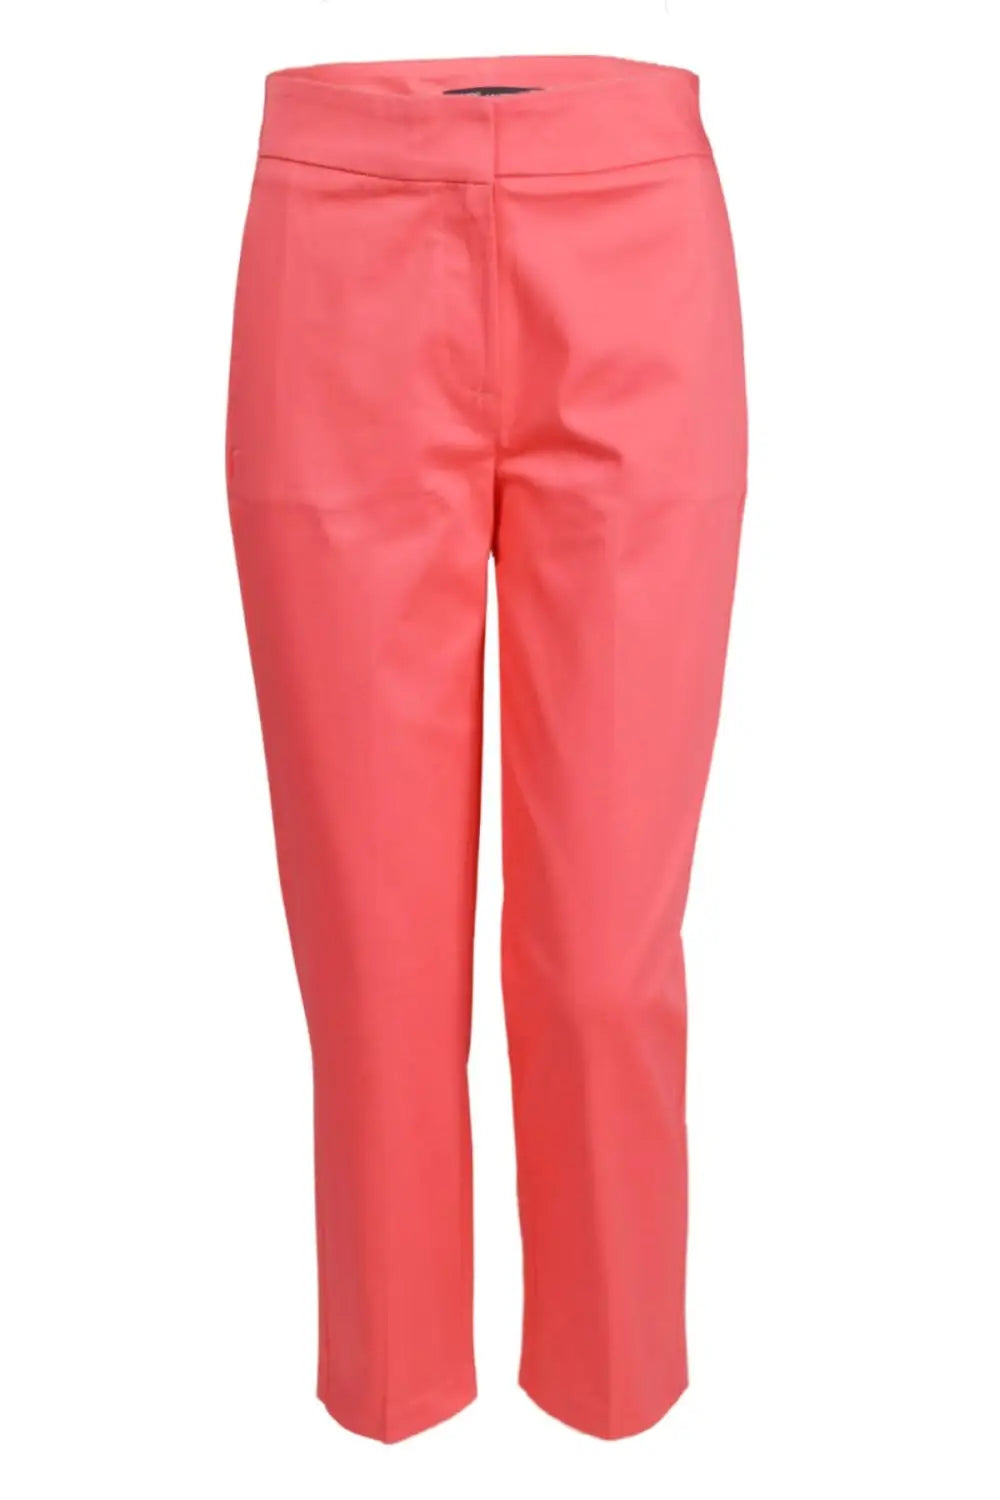 M&S Cropped Smart Trousers